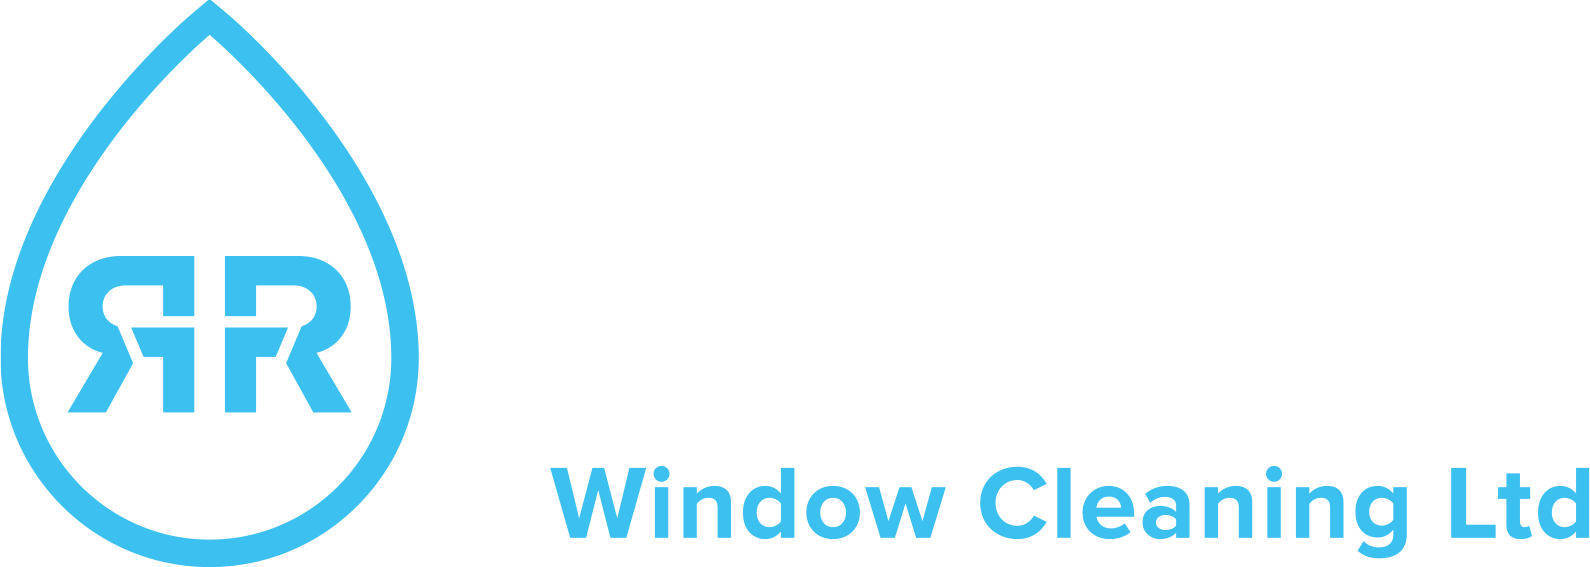 Reliable Reflections